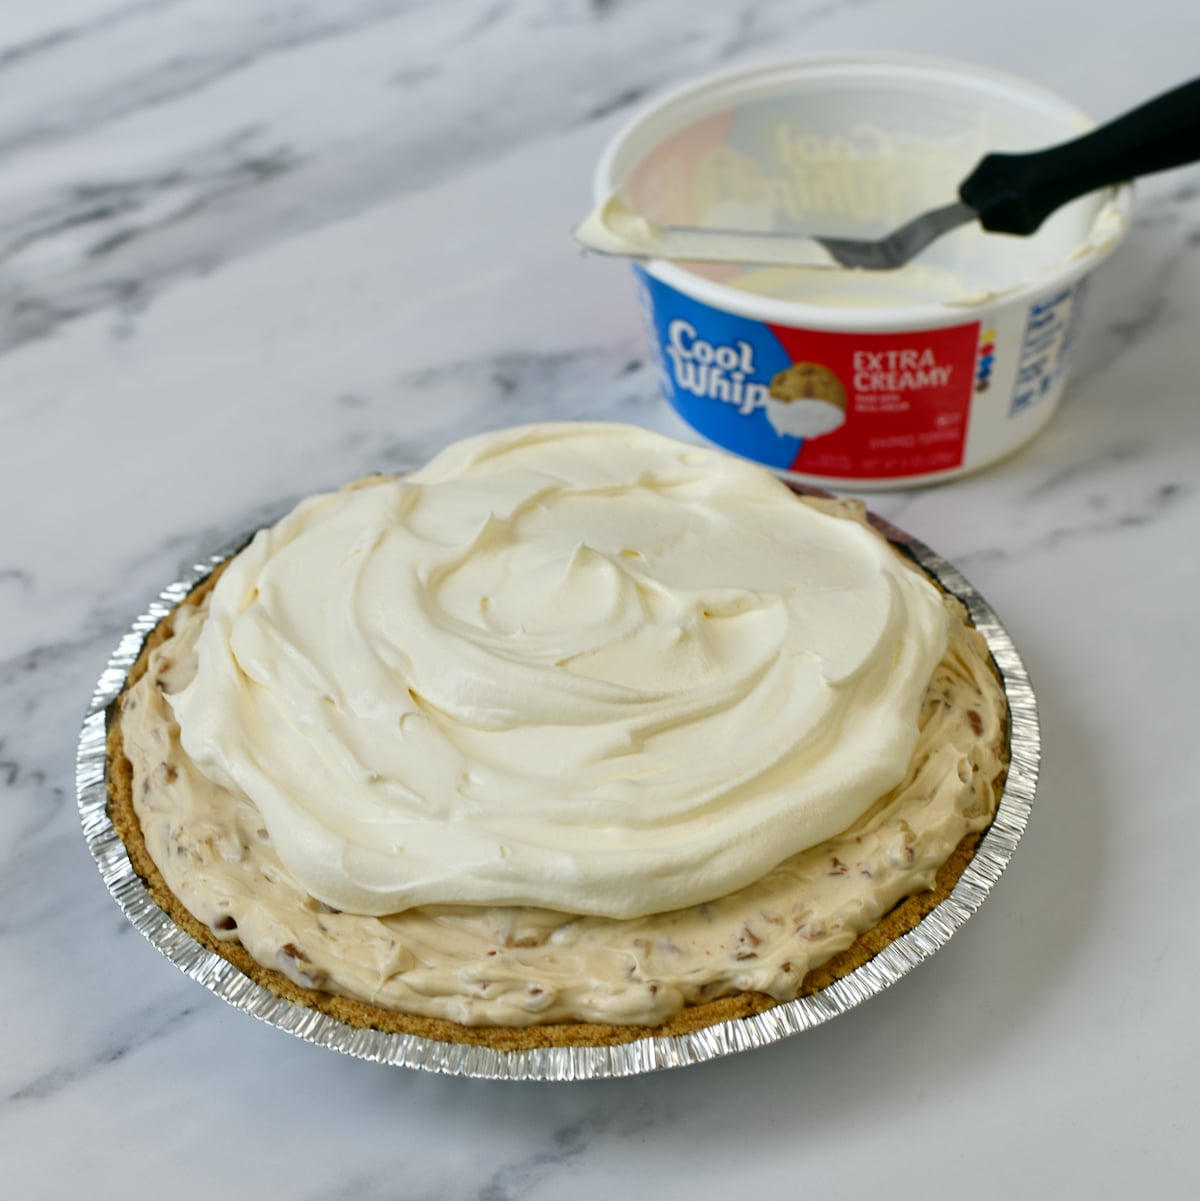 Pecan Cream Pie filling in a graham cracker crust topped with Cool Whip